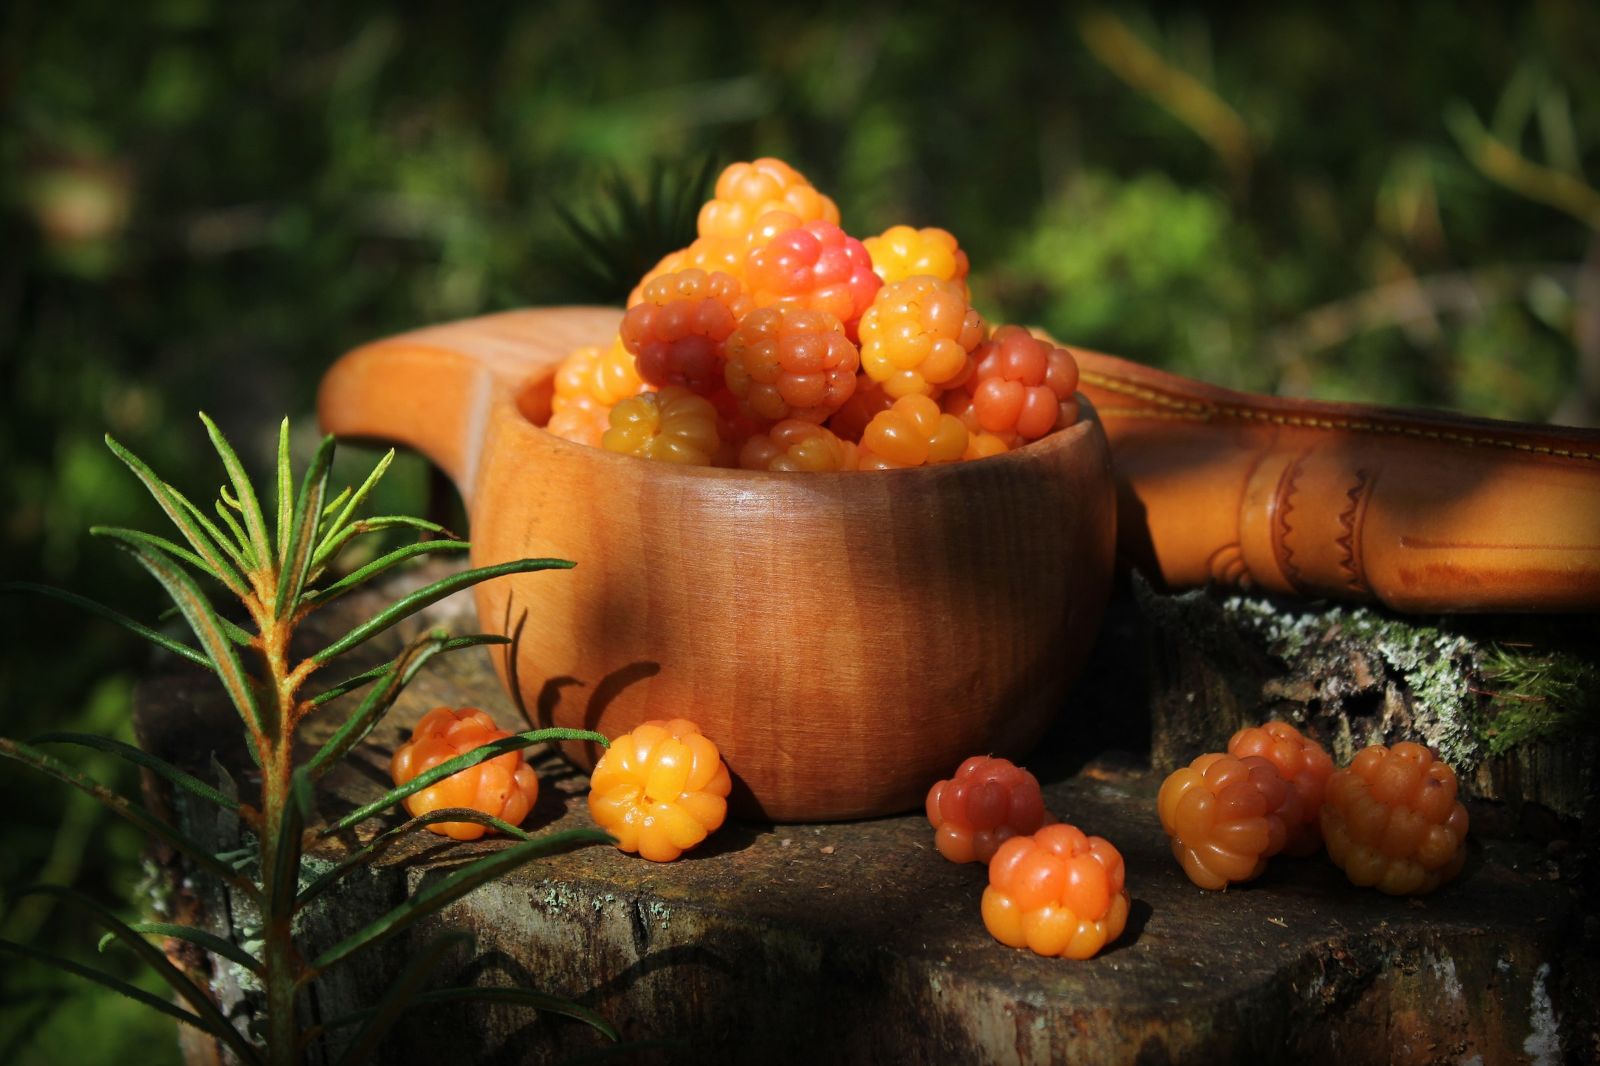 Foraged cloudberries in Finland